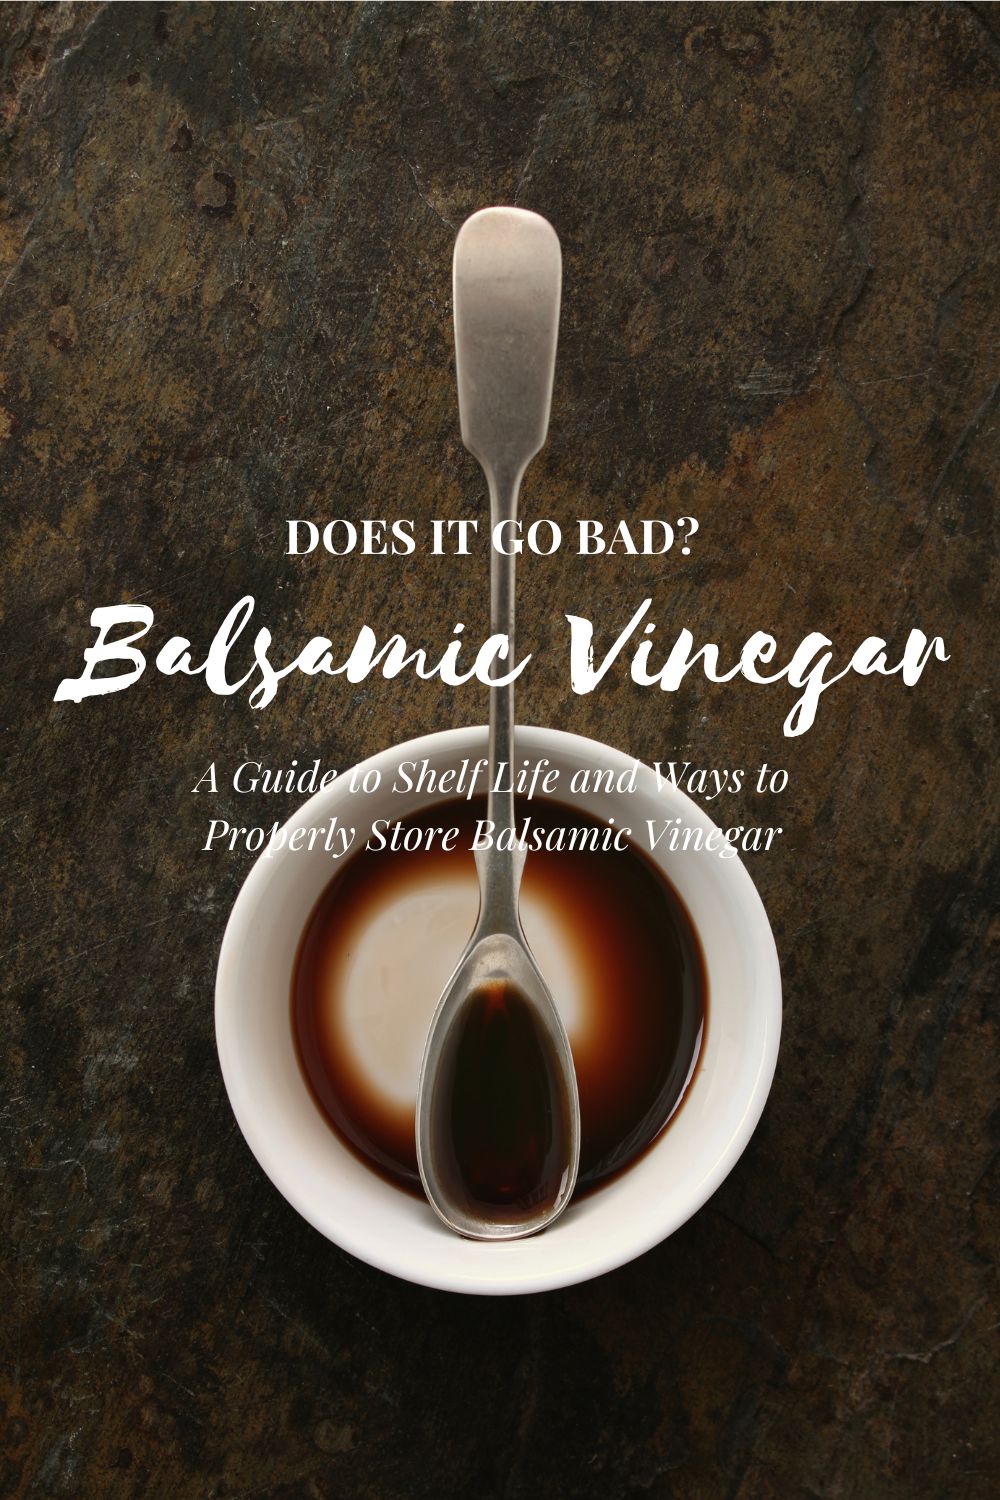 Does Balsamic Vinegar Go Bad? A Guide to Its Shelf Life and Proper Storage